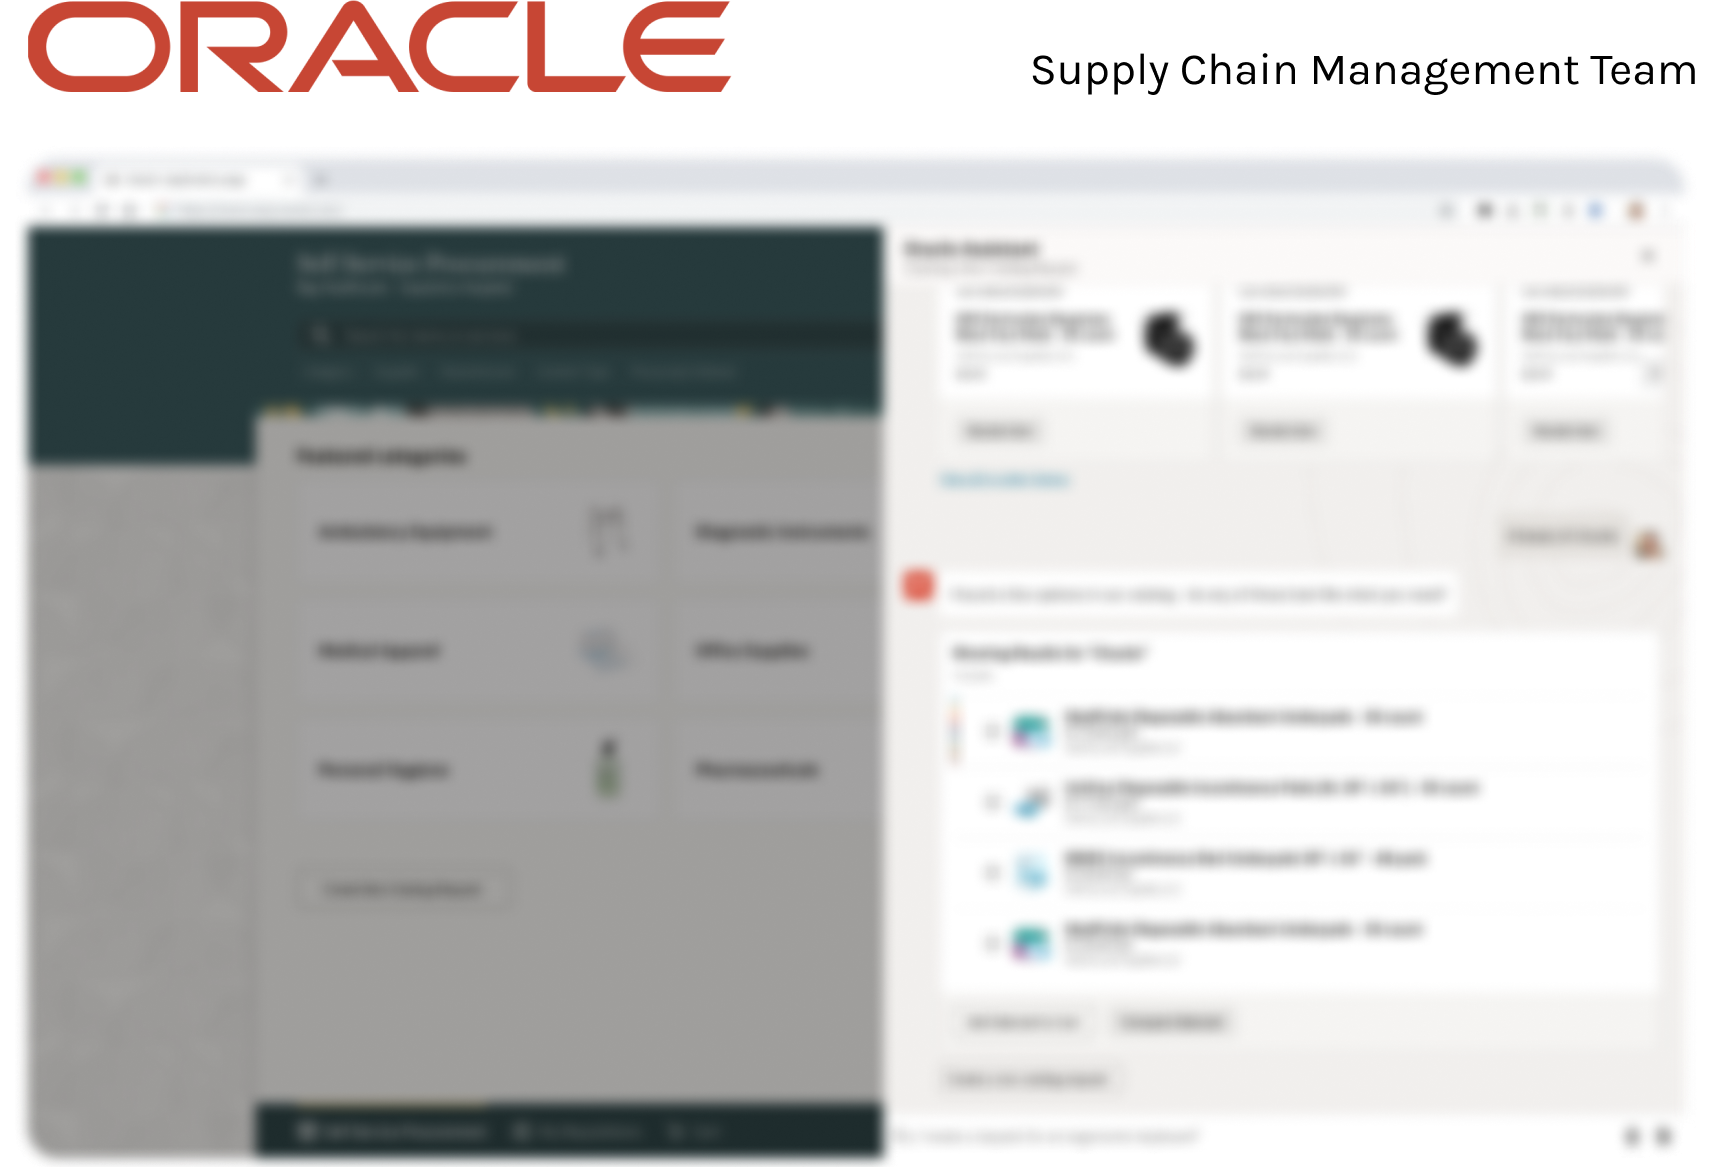 Oracle internship cover image, with the oracle logo and a blurred image of the design Evie worked on